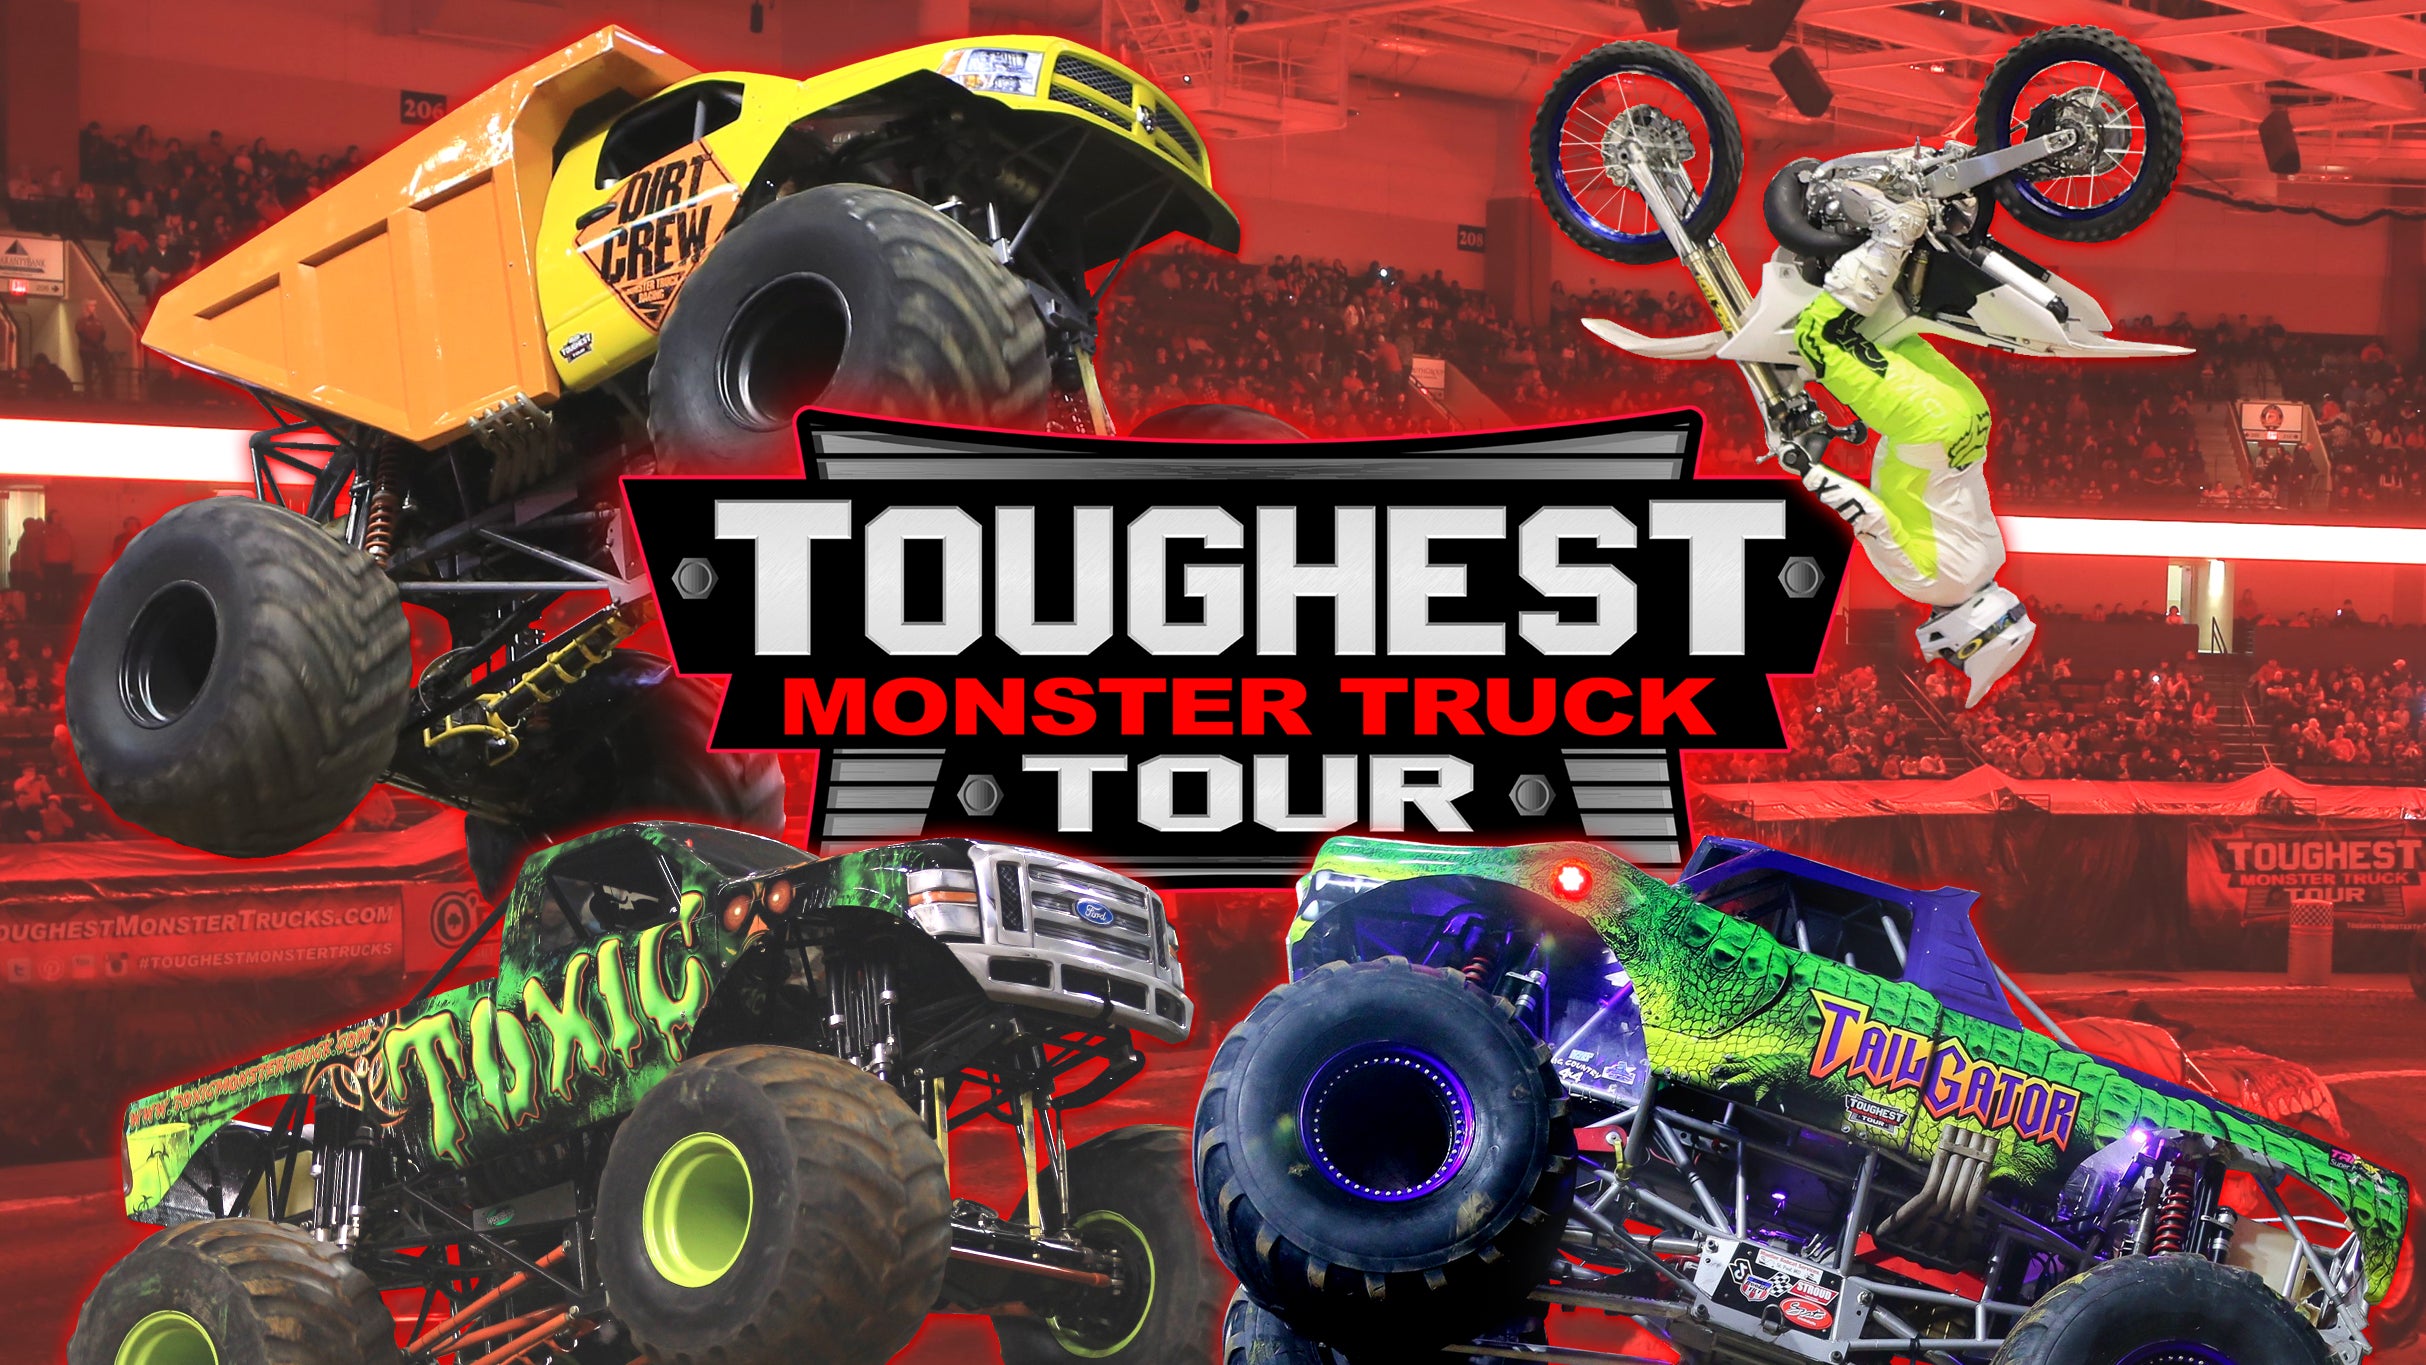 presale code for Toughest Monster Truck Tour presale tickets in Youngstown